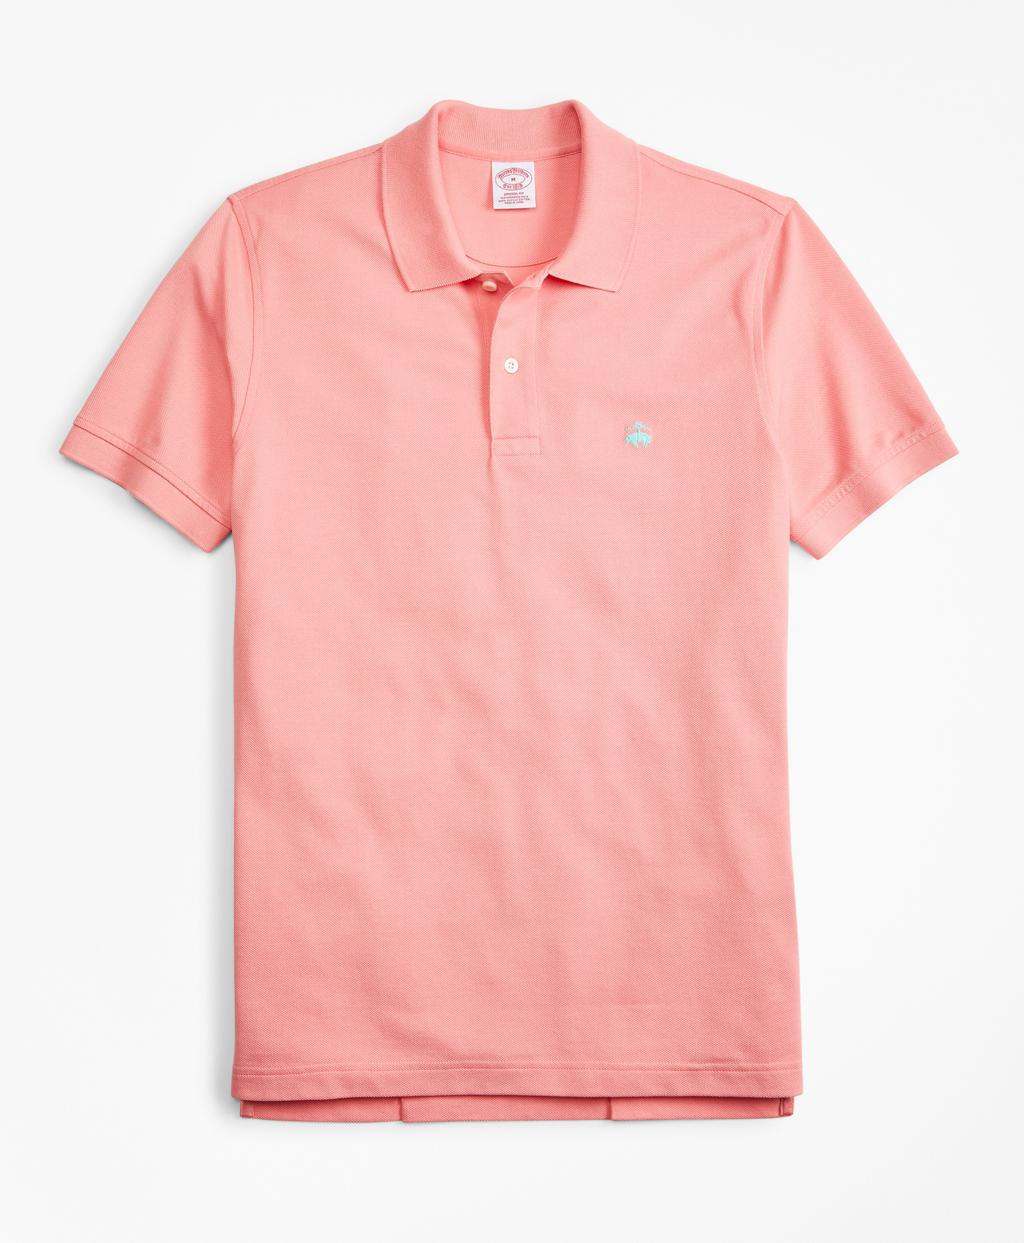 Brooks Brothers Original Fit Supima Cotton Performance Polo Shirt in ...